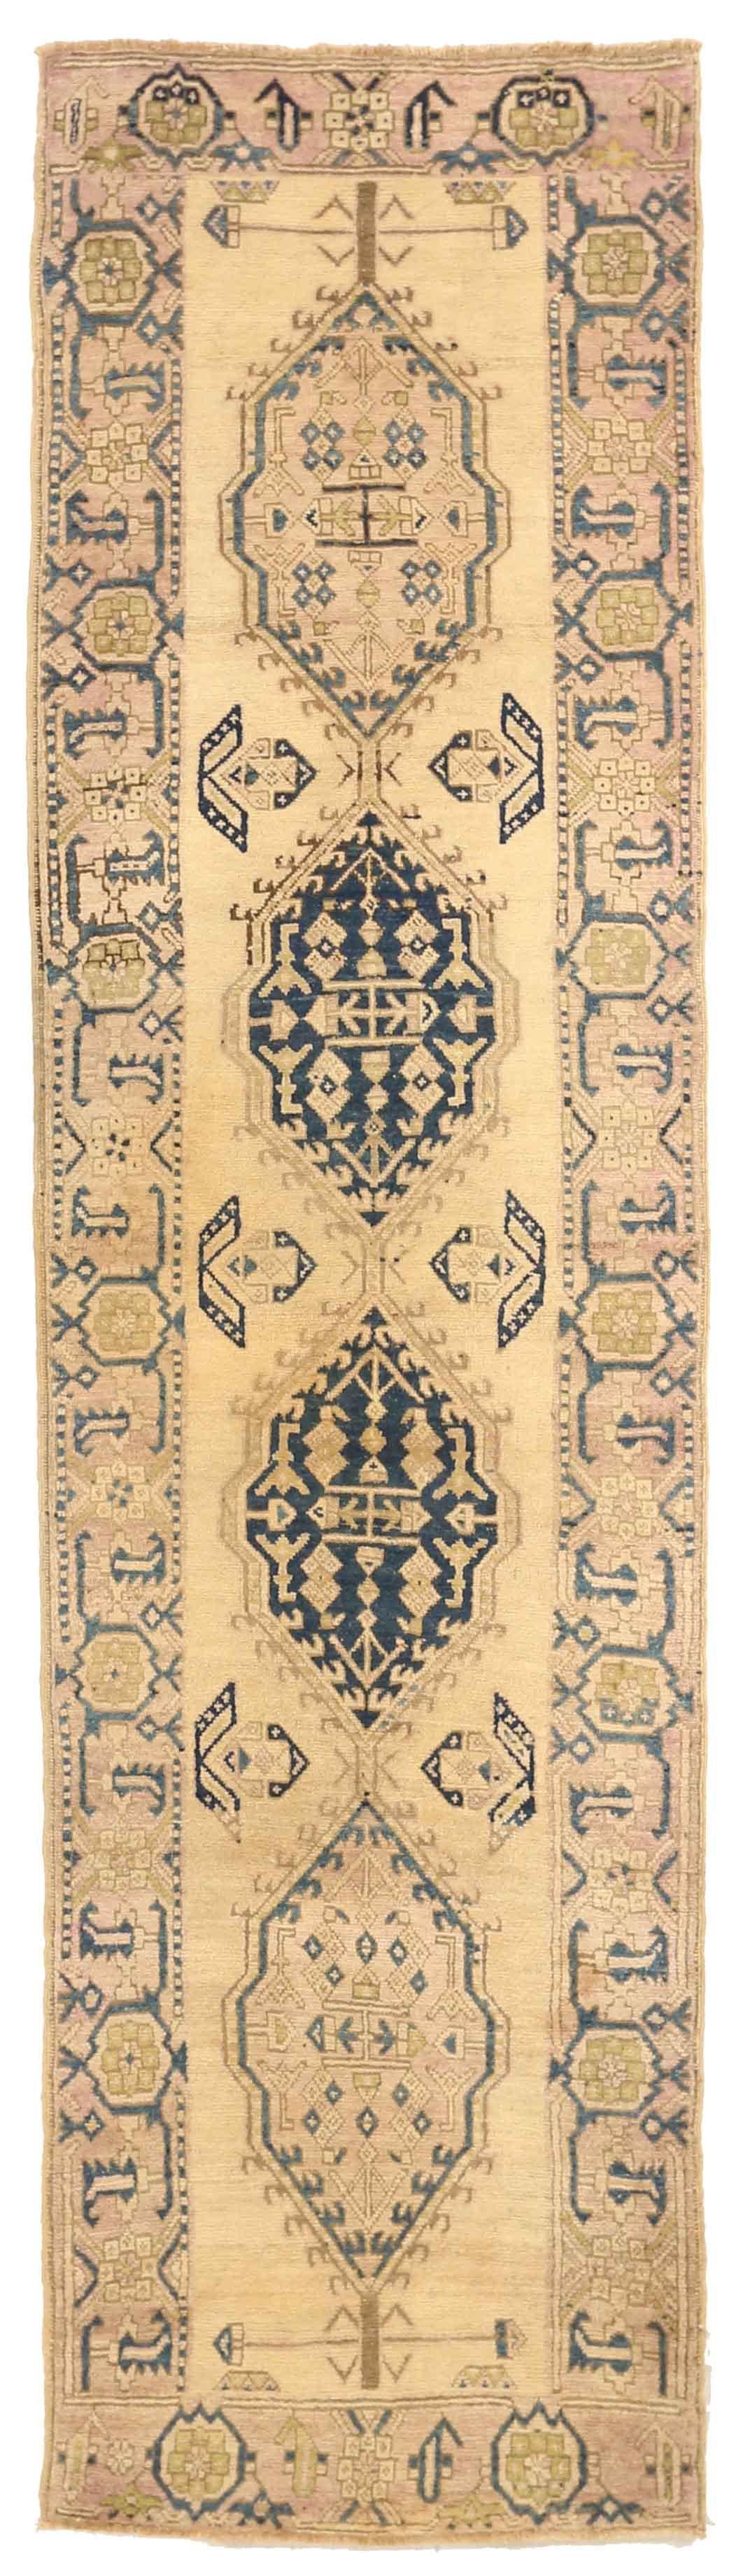 Made of fine camel hair, this antique Persian rug features a unique fusion of tribal and geometric patterns that weavers from the ancient city of Sarab are famous for. The details match perfectly with the chosen color palette of beige, navy, and